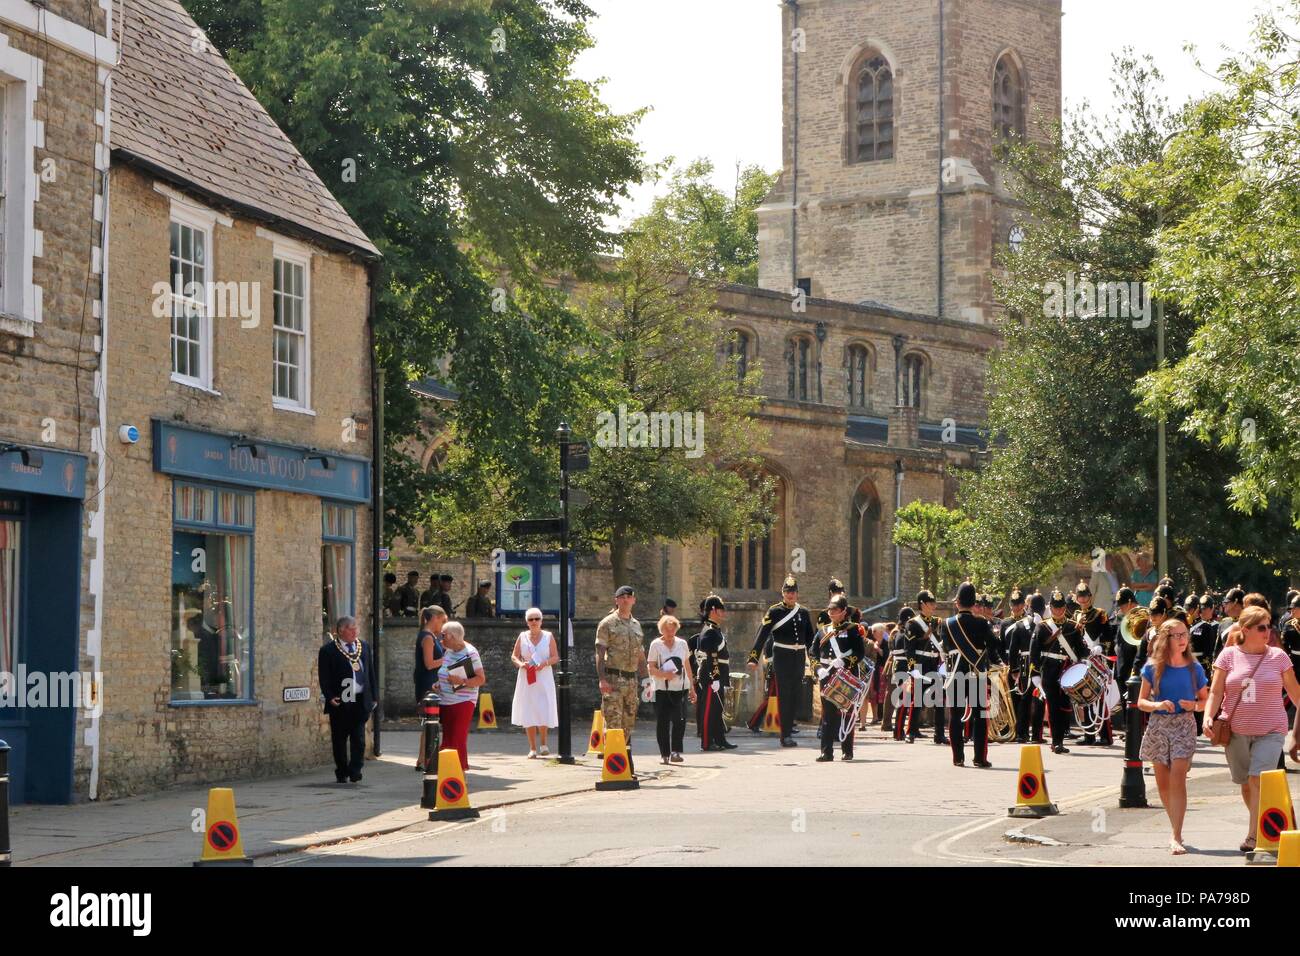 Bicester, Oxfordshire, UK 21.07.2018 - 1 Regiment RLC granted The Freedom of Entry into Bicester, the highest civic honour that can be bestowed on a military unit.  The Regiment exercised their 'freedom' to march through the town to the Market Square, with swords drawn, bayonets fixed, drums beating, bands playing and colours flying. Credit: Michelle Bridges/Alamy Live News Stock Photo